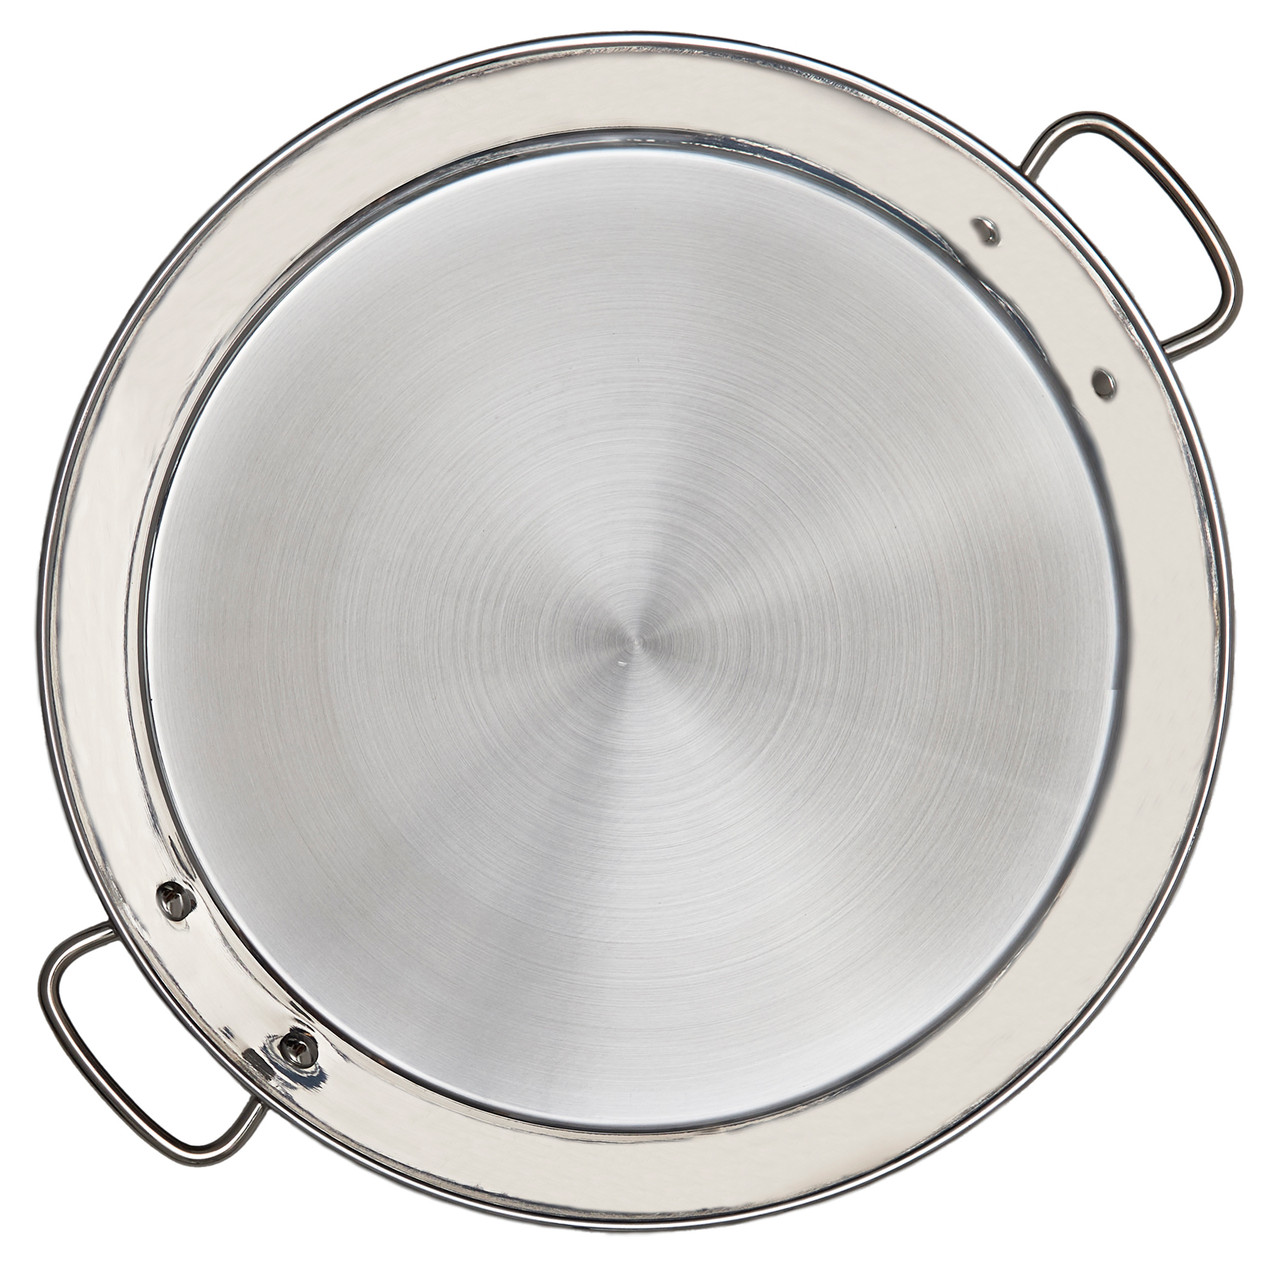 Stainless Steel Paella Pan 14-Inch - Fante's Kitchen Shop - Since 1906